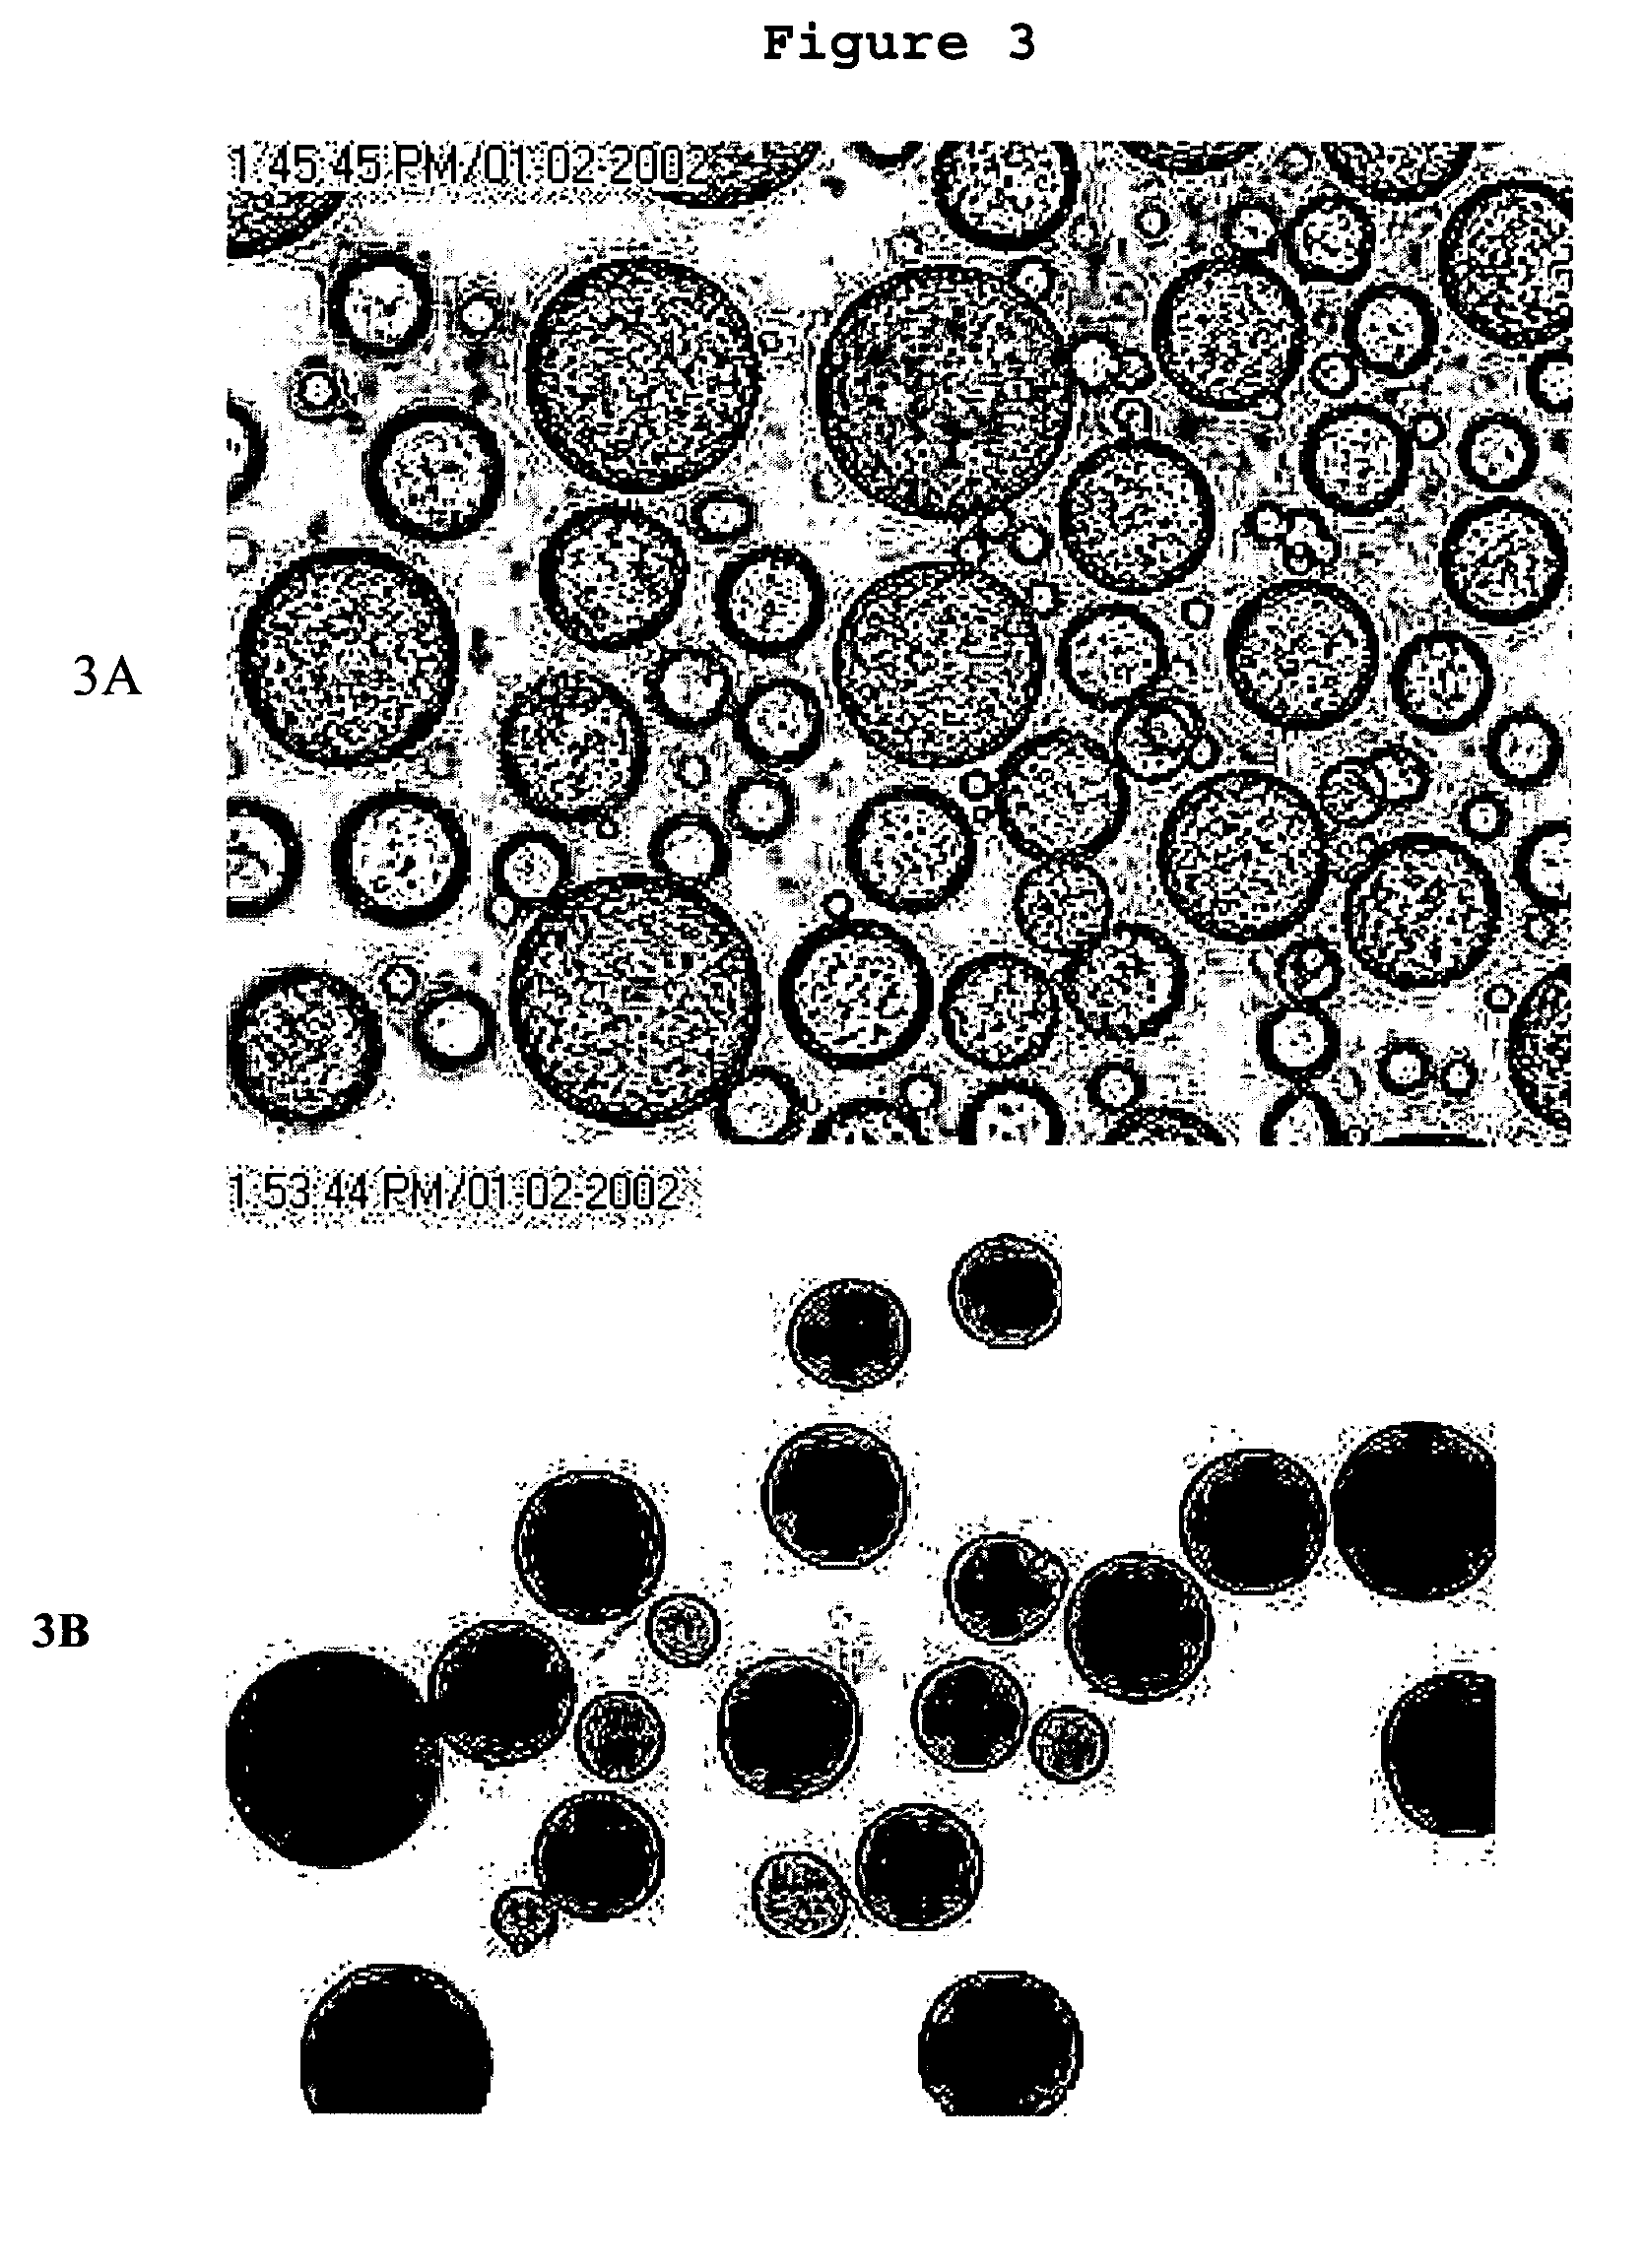 Aquespheres, their preparation and uses thereof